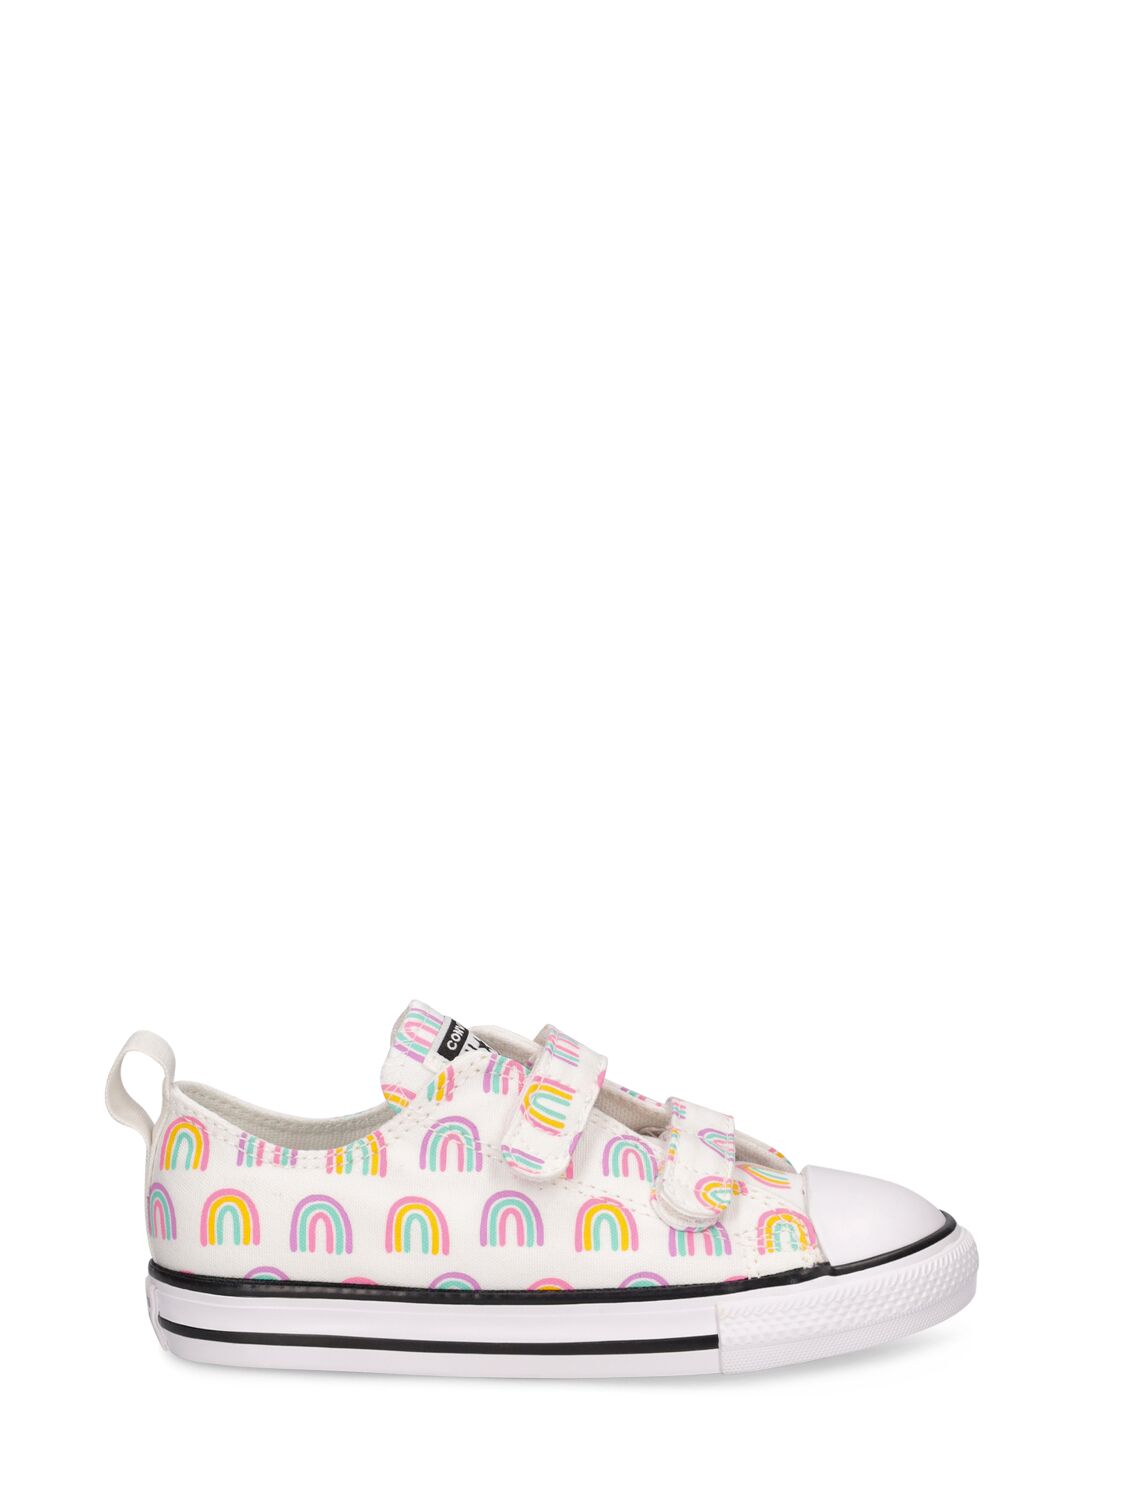 Image of Rainbow Print Canvas Strap Sneakers